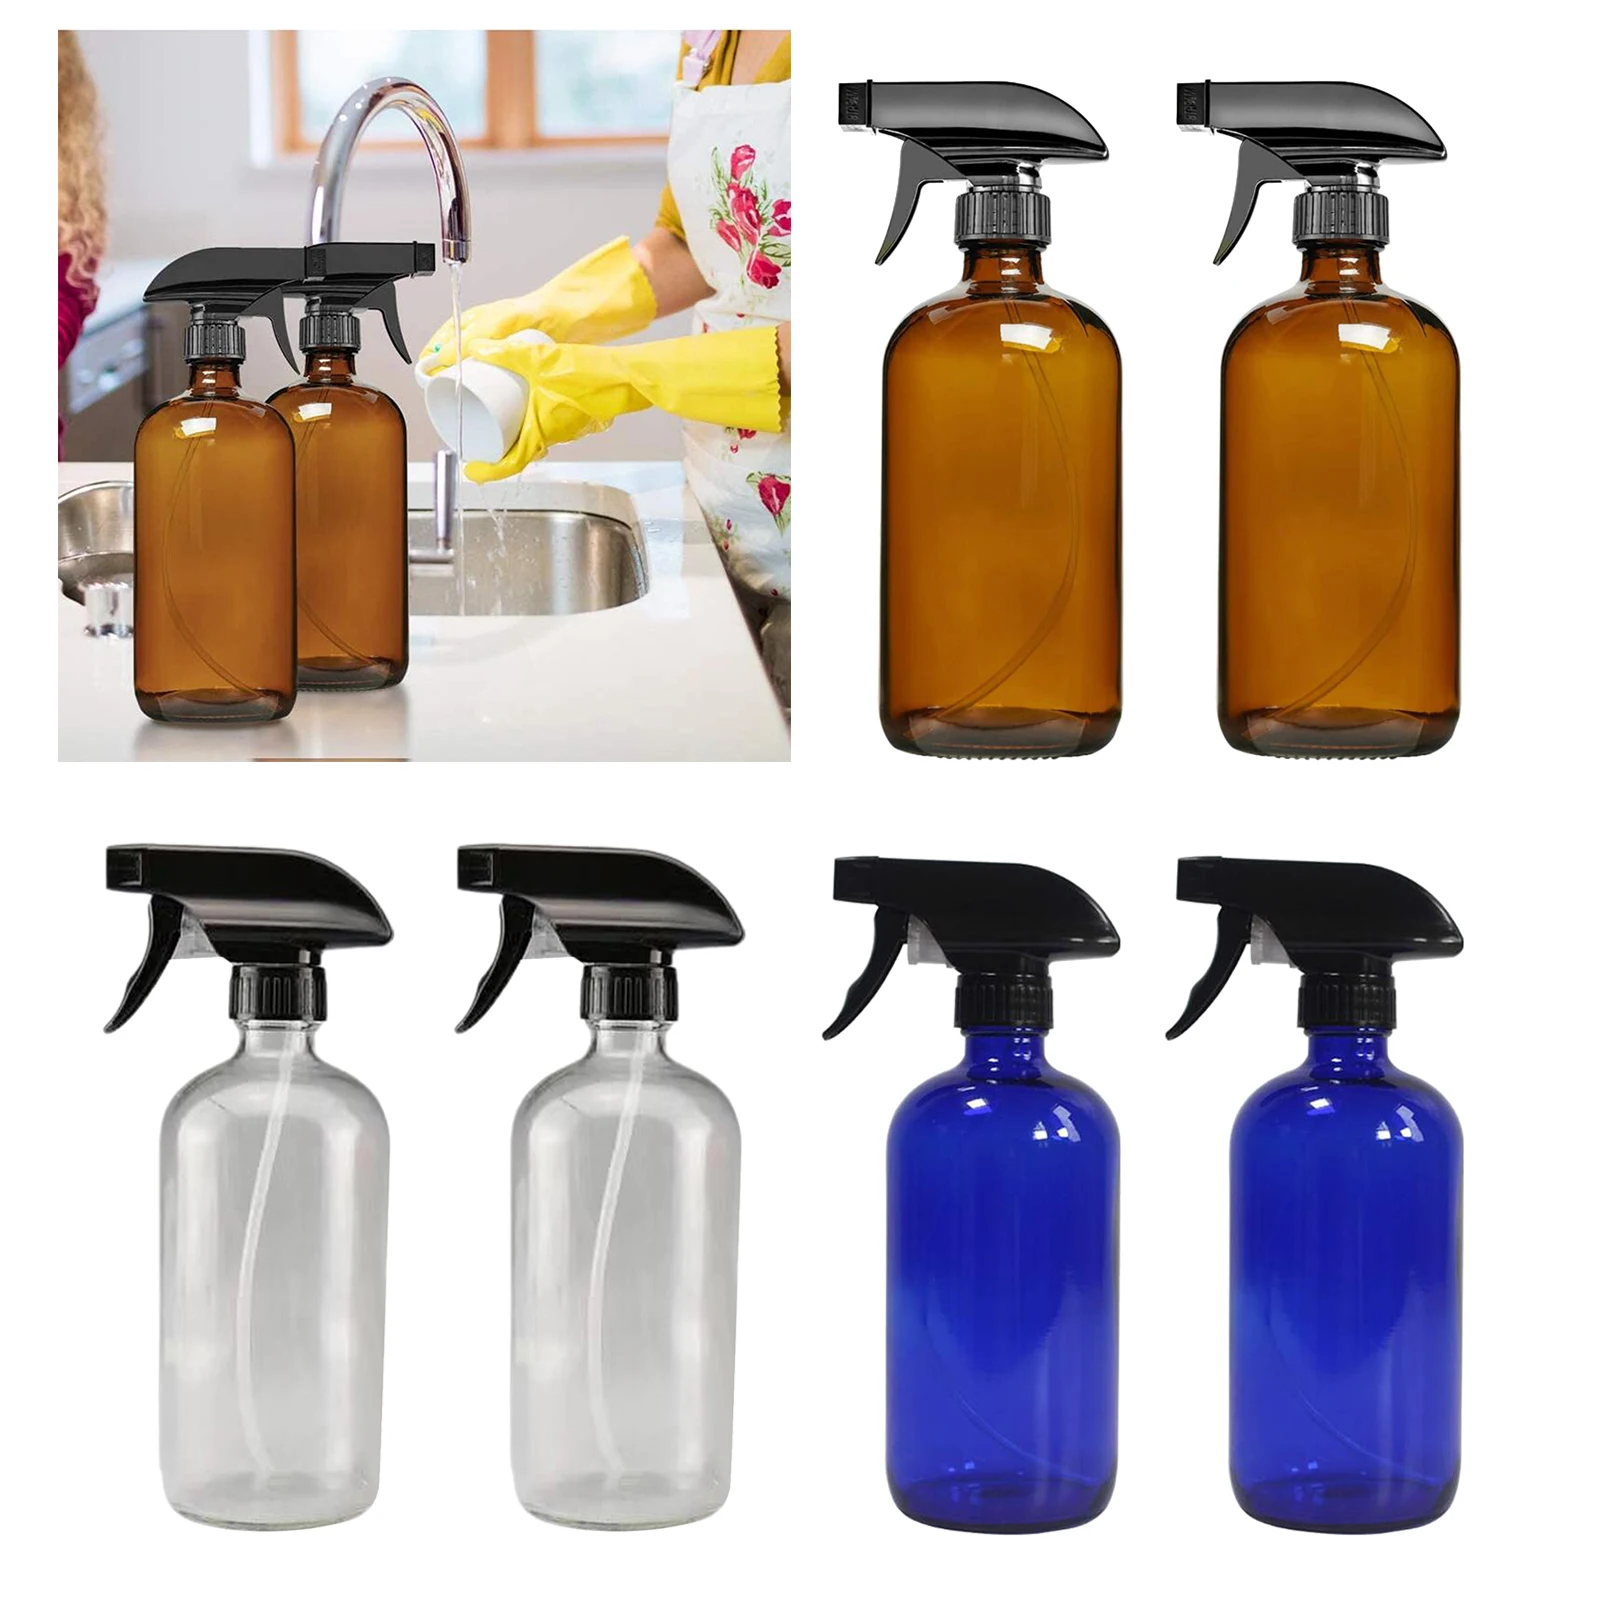 2 Pieces Boston Empty Glass Sprayer Bottles for Oils, Great Never Go Back to Commercial Cleaners